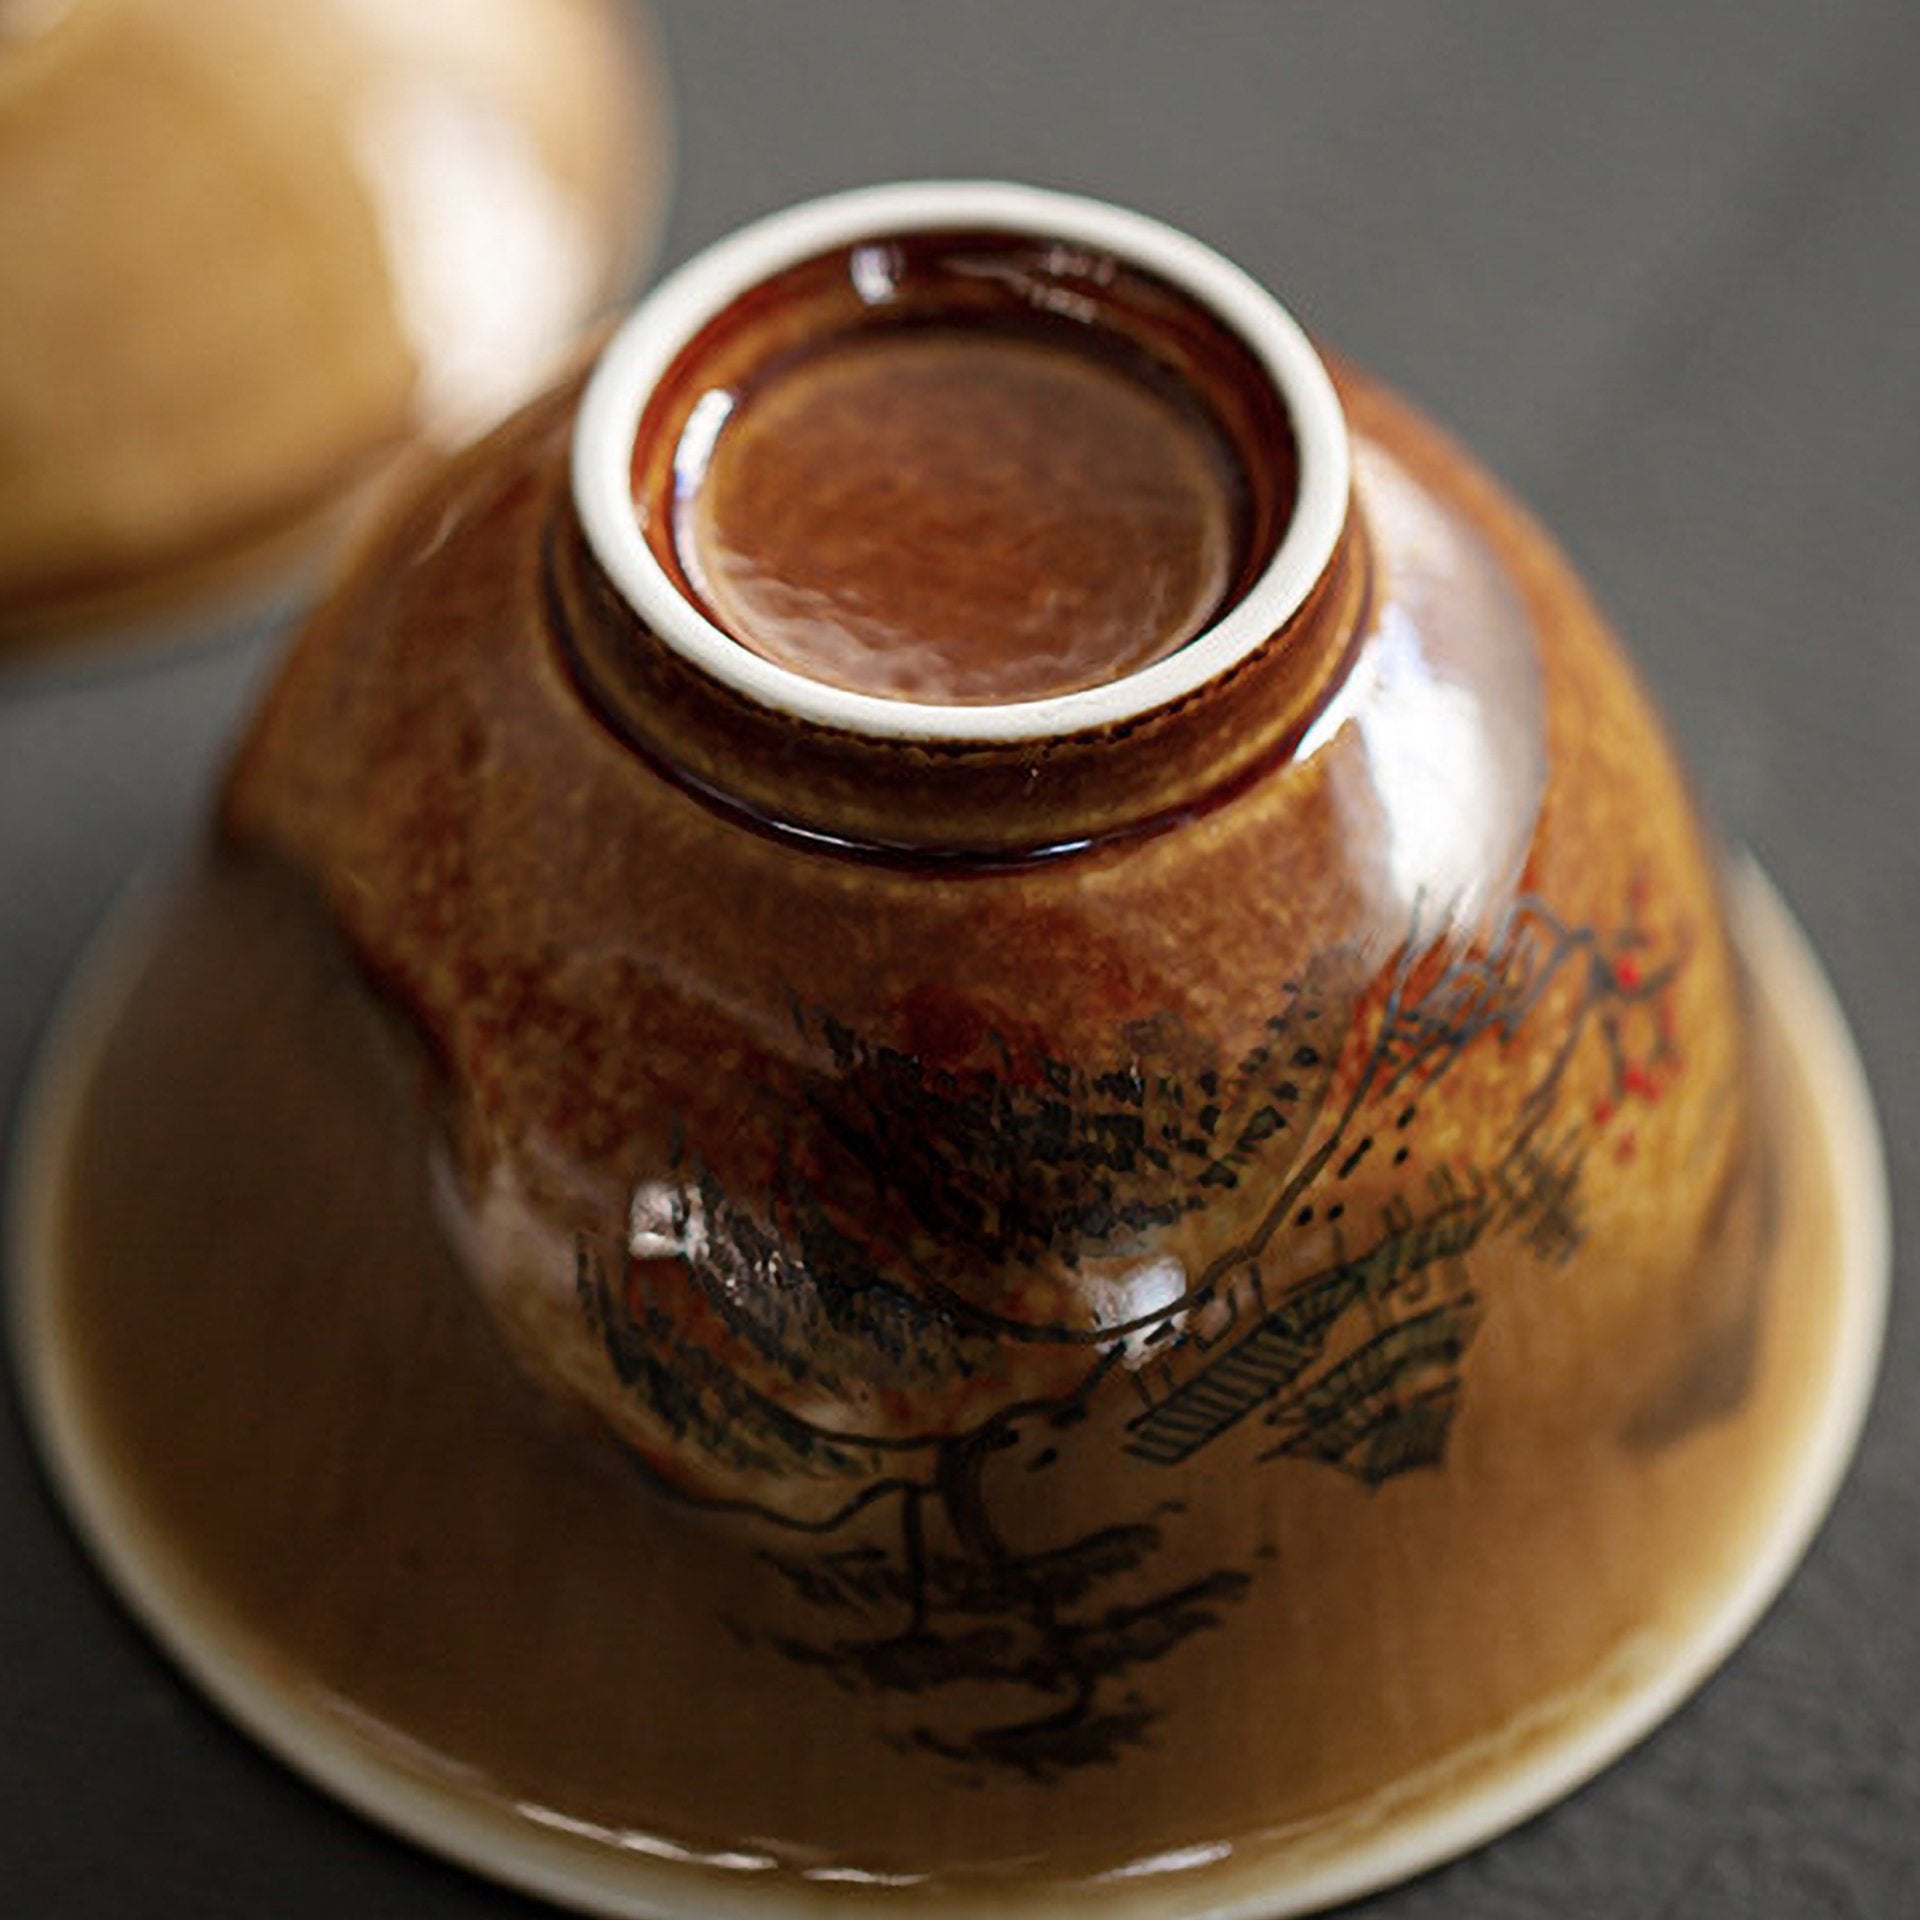 Bottom view of an inverted tea bowl showing painting details.